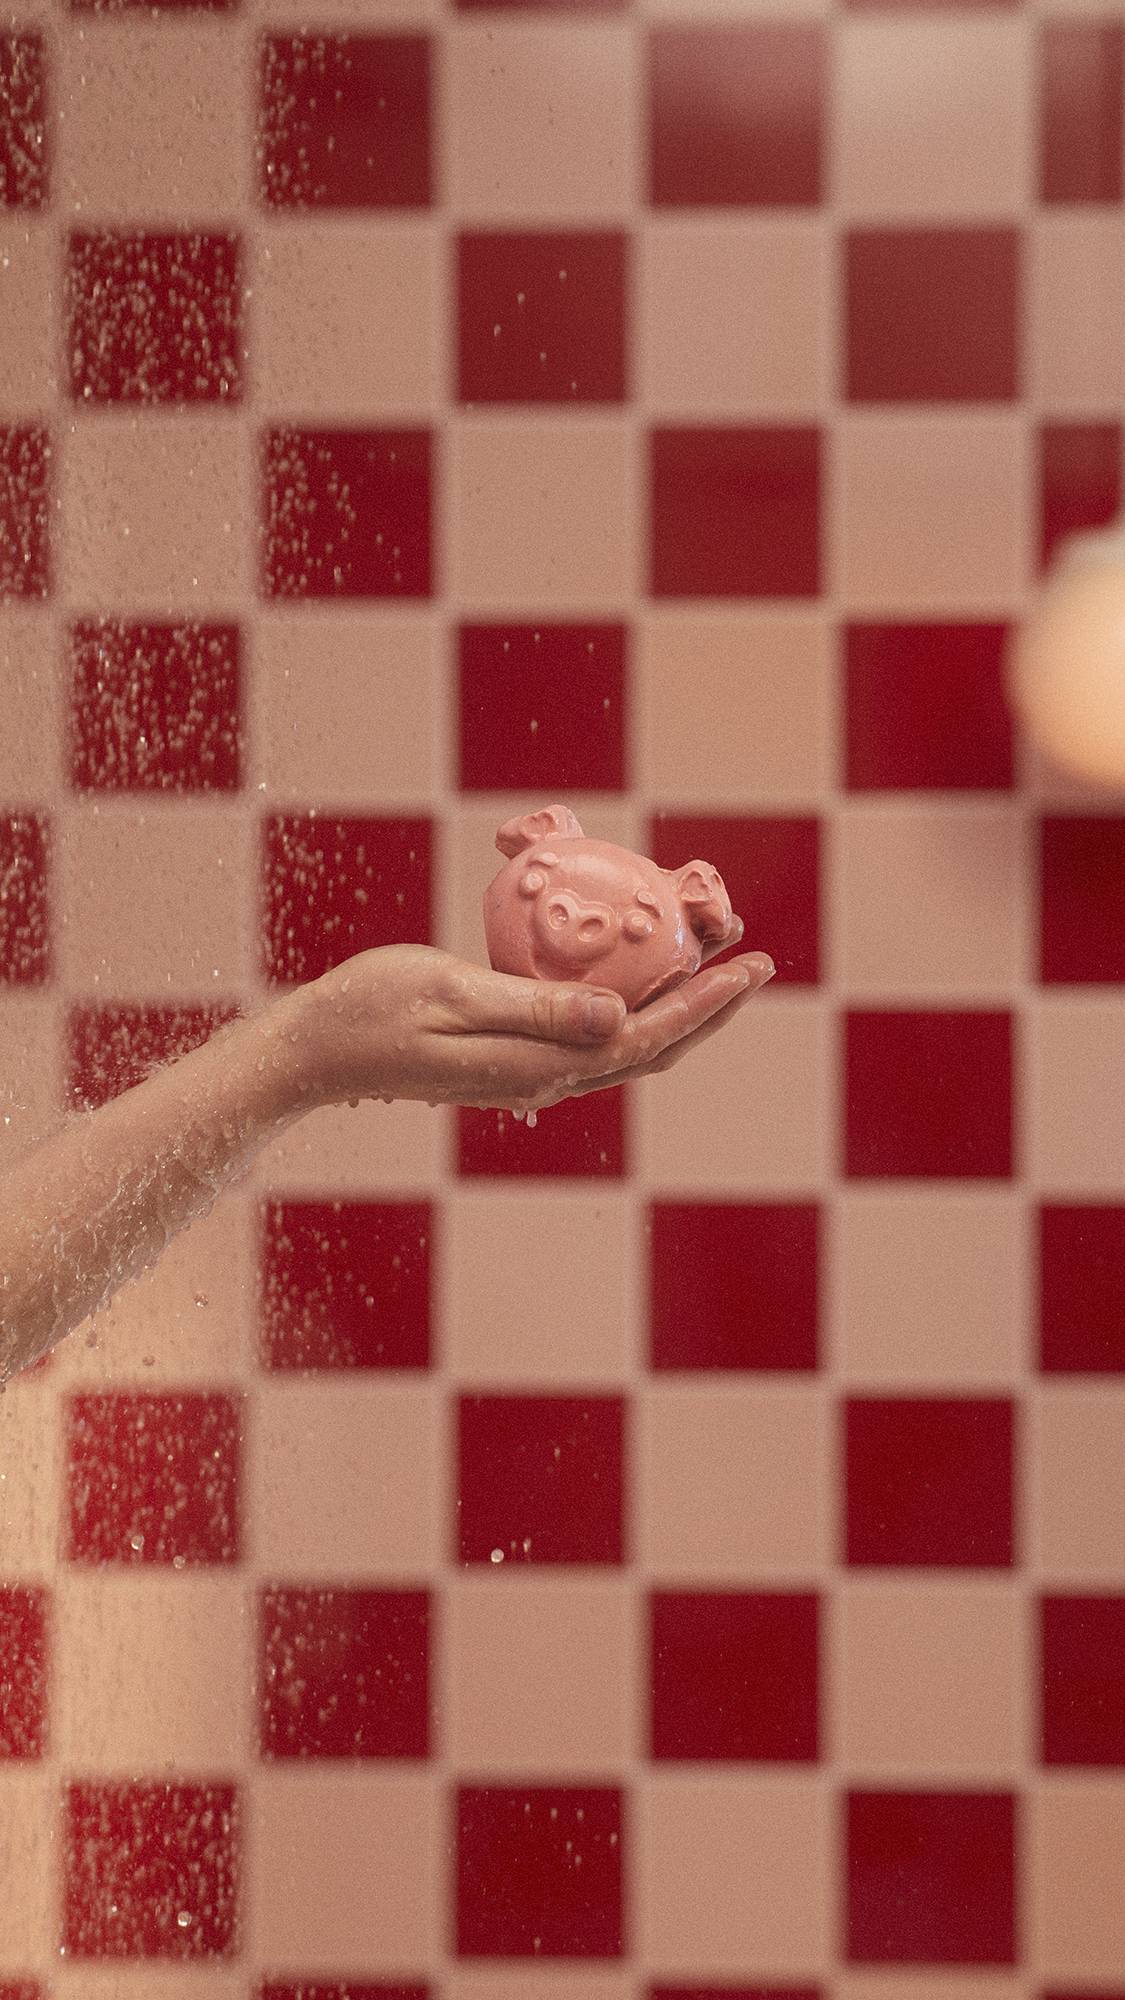 The image shows a close-up of the model's hand as they hold the My Li'l Chis Piglet soap in their hand under running water. 